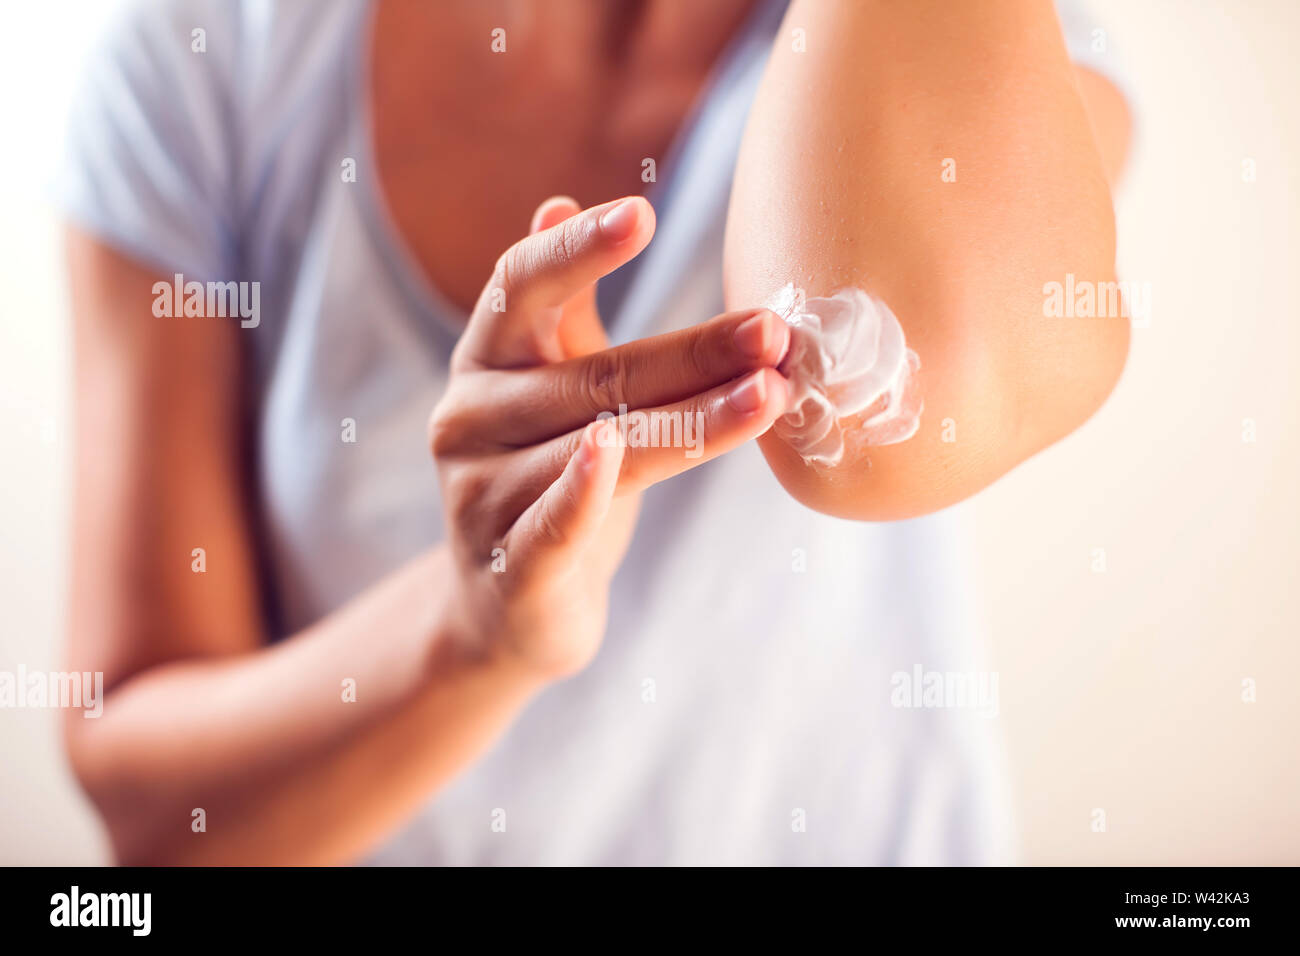 Woman applies cream on her elbow.People, healthcare and medicine concept Stock Photo